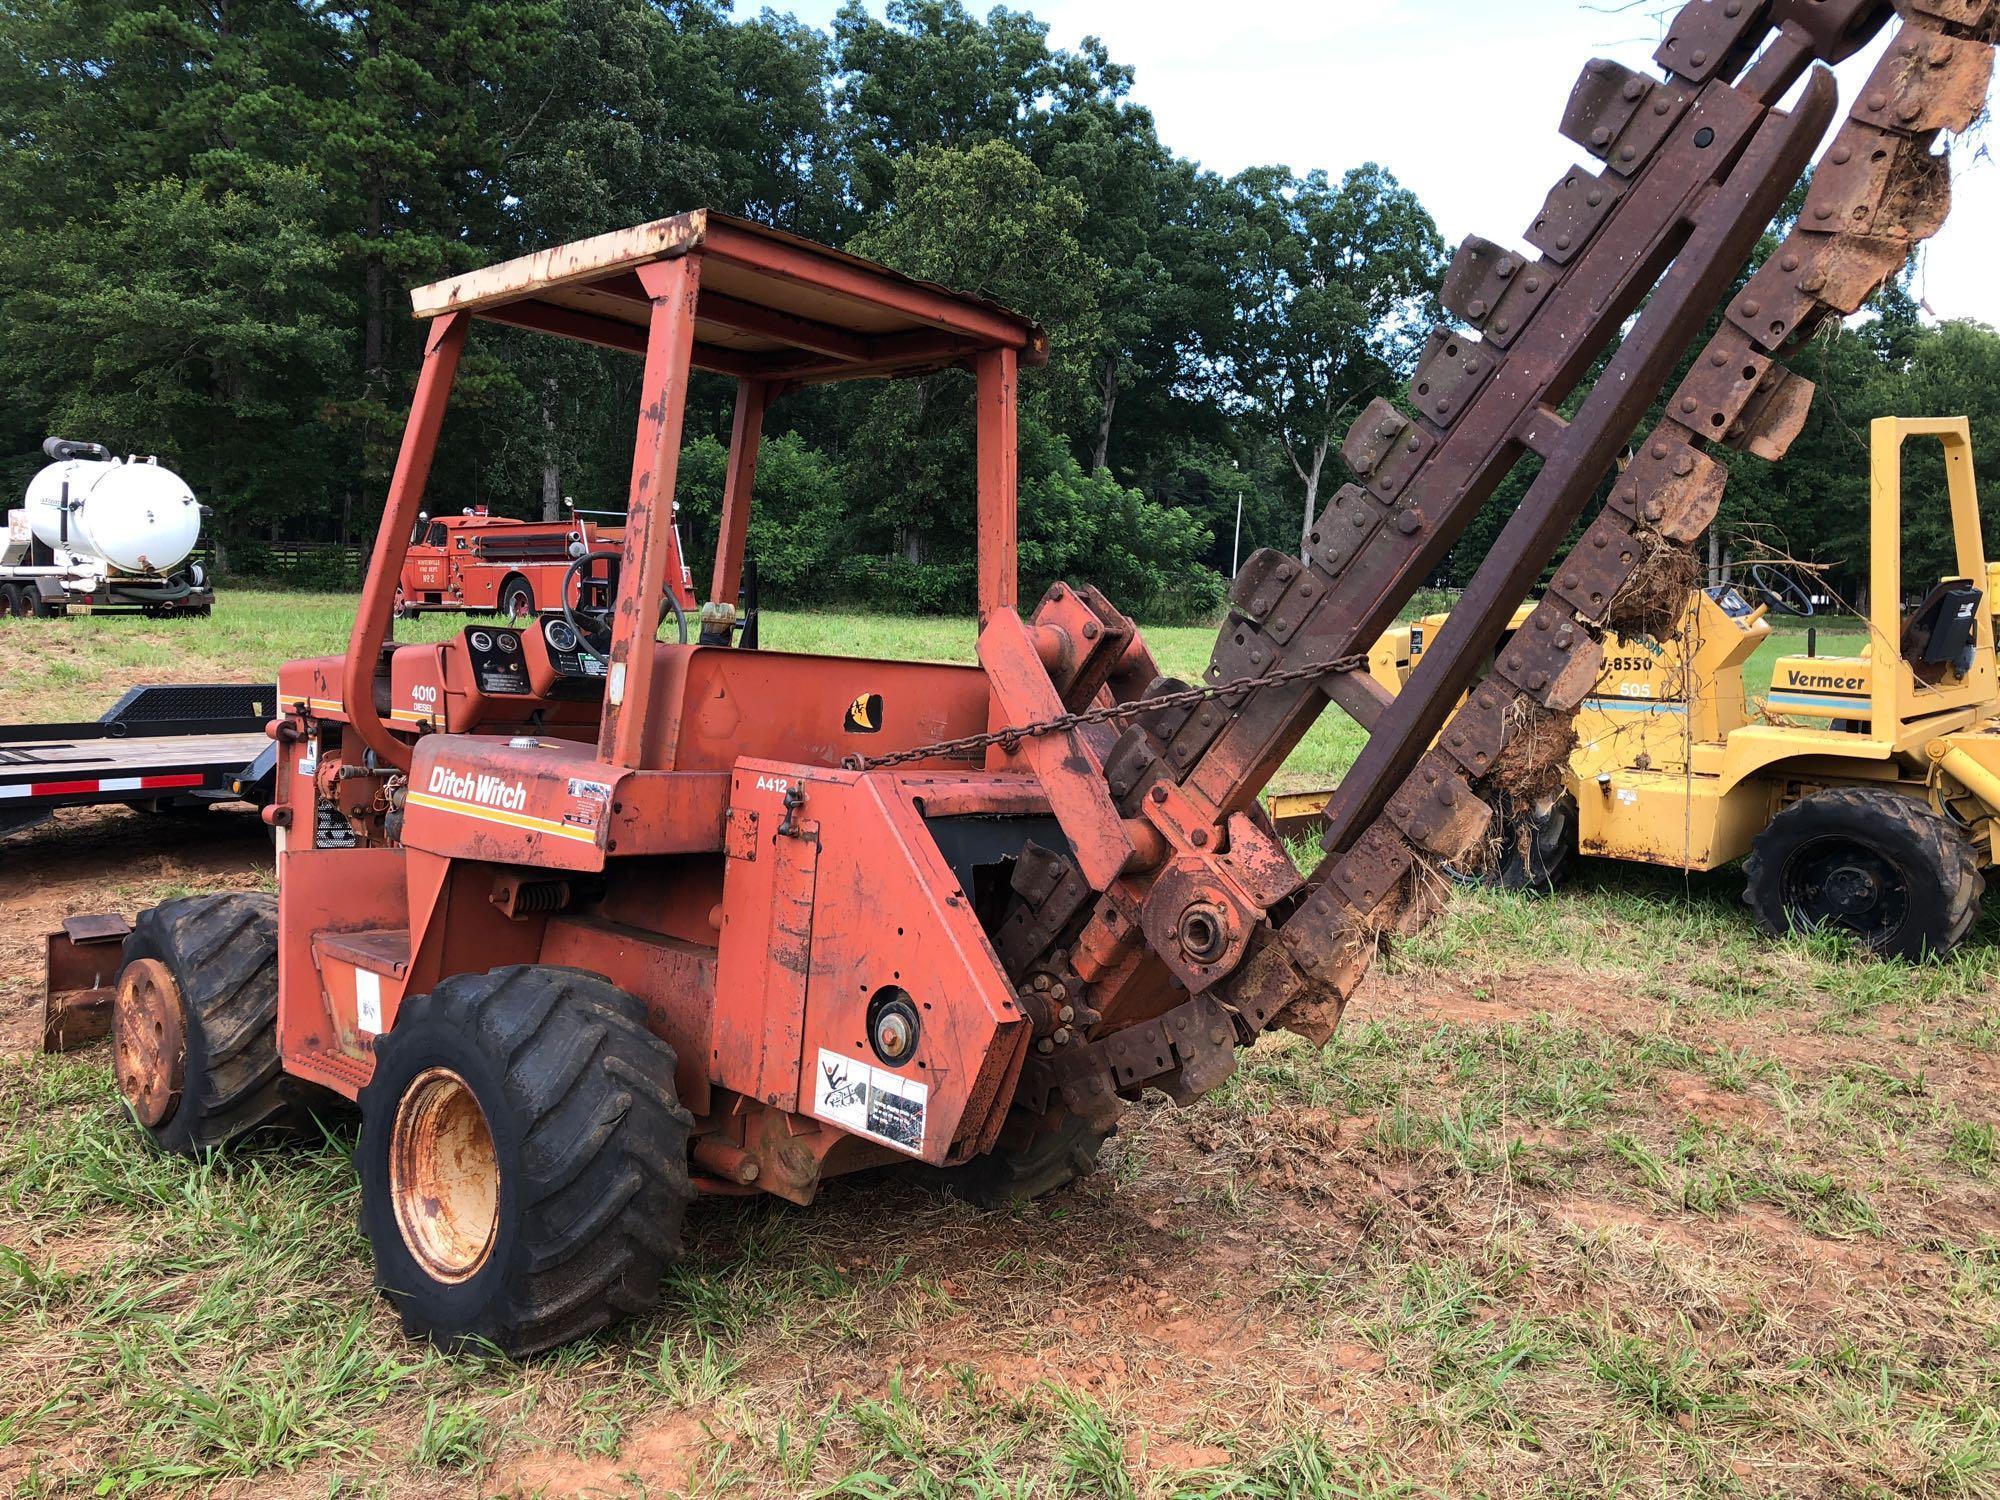 DITCH WITCH 4010 TRENCHER